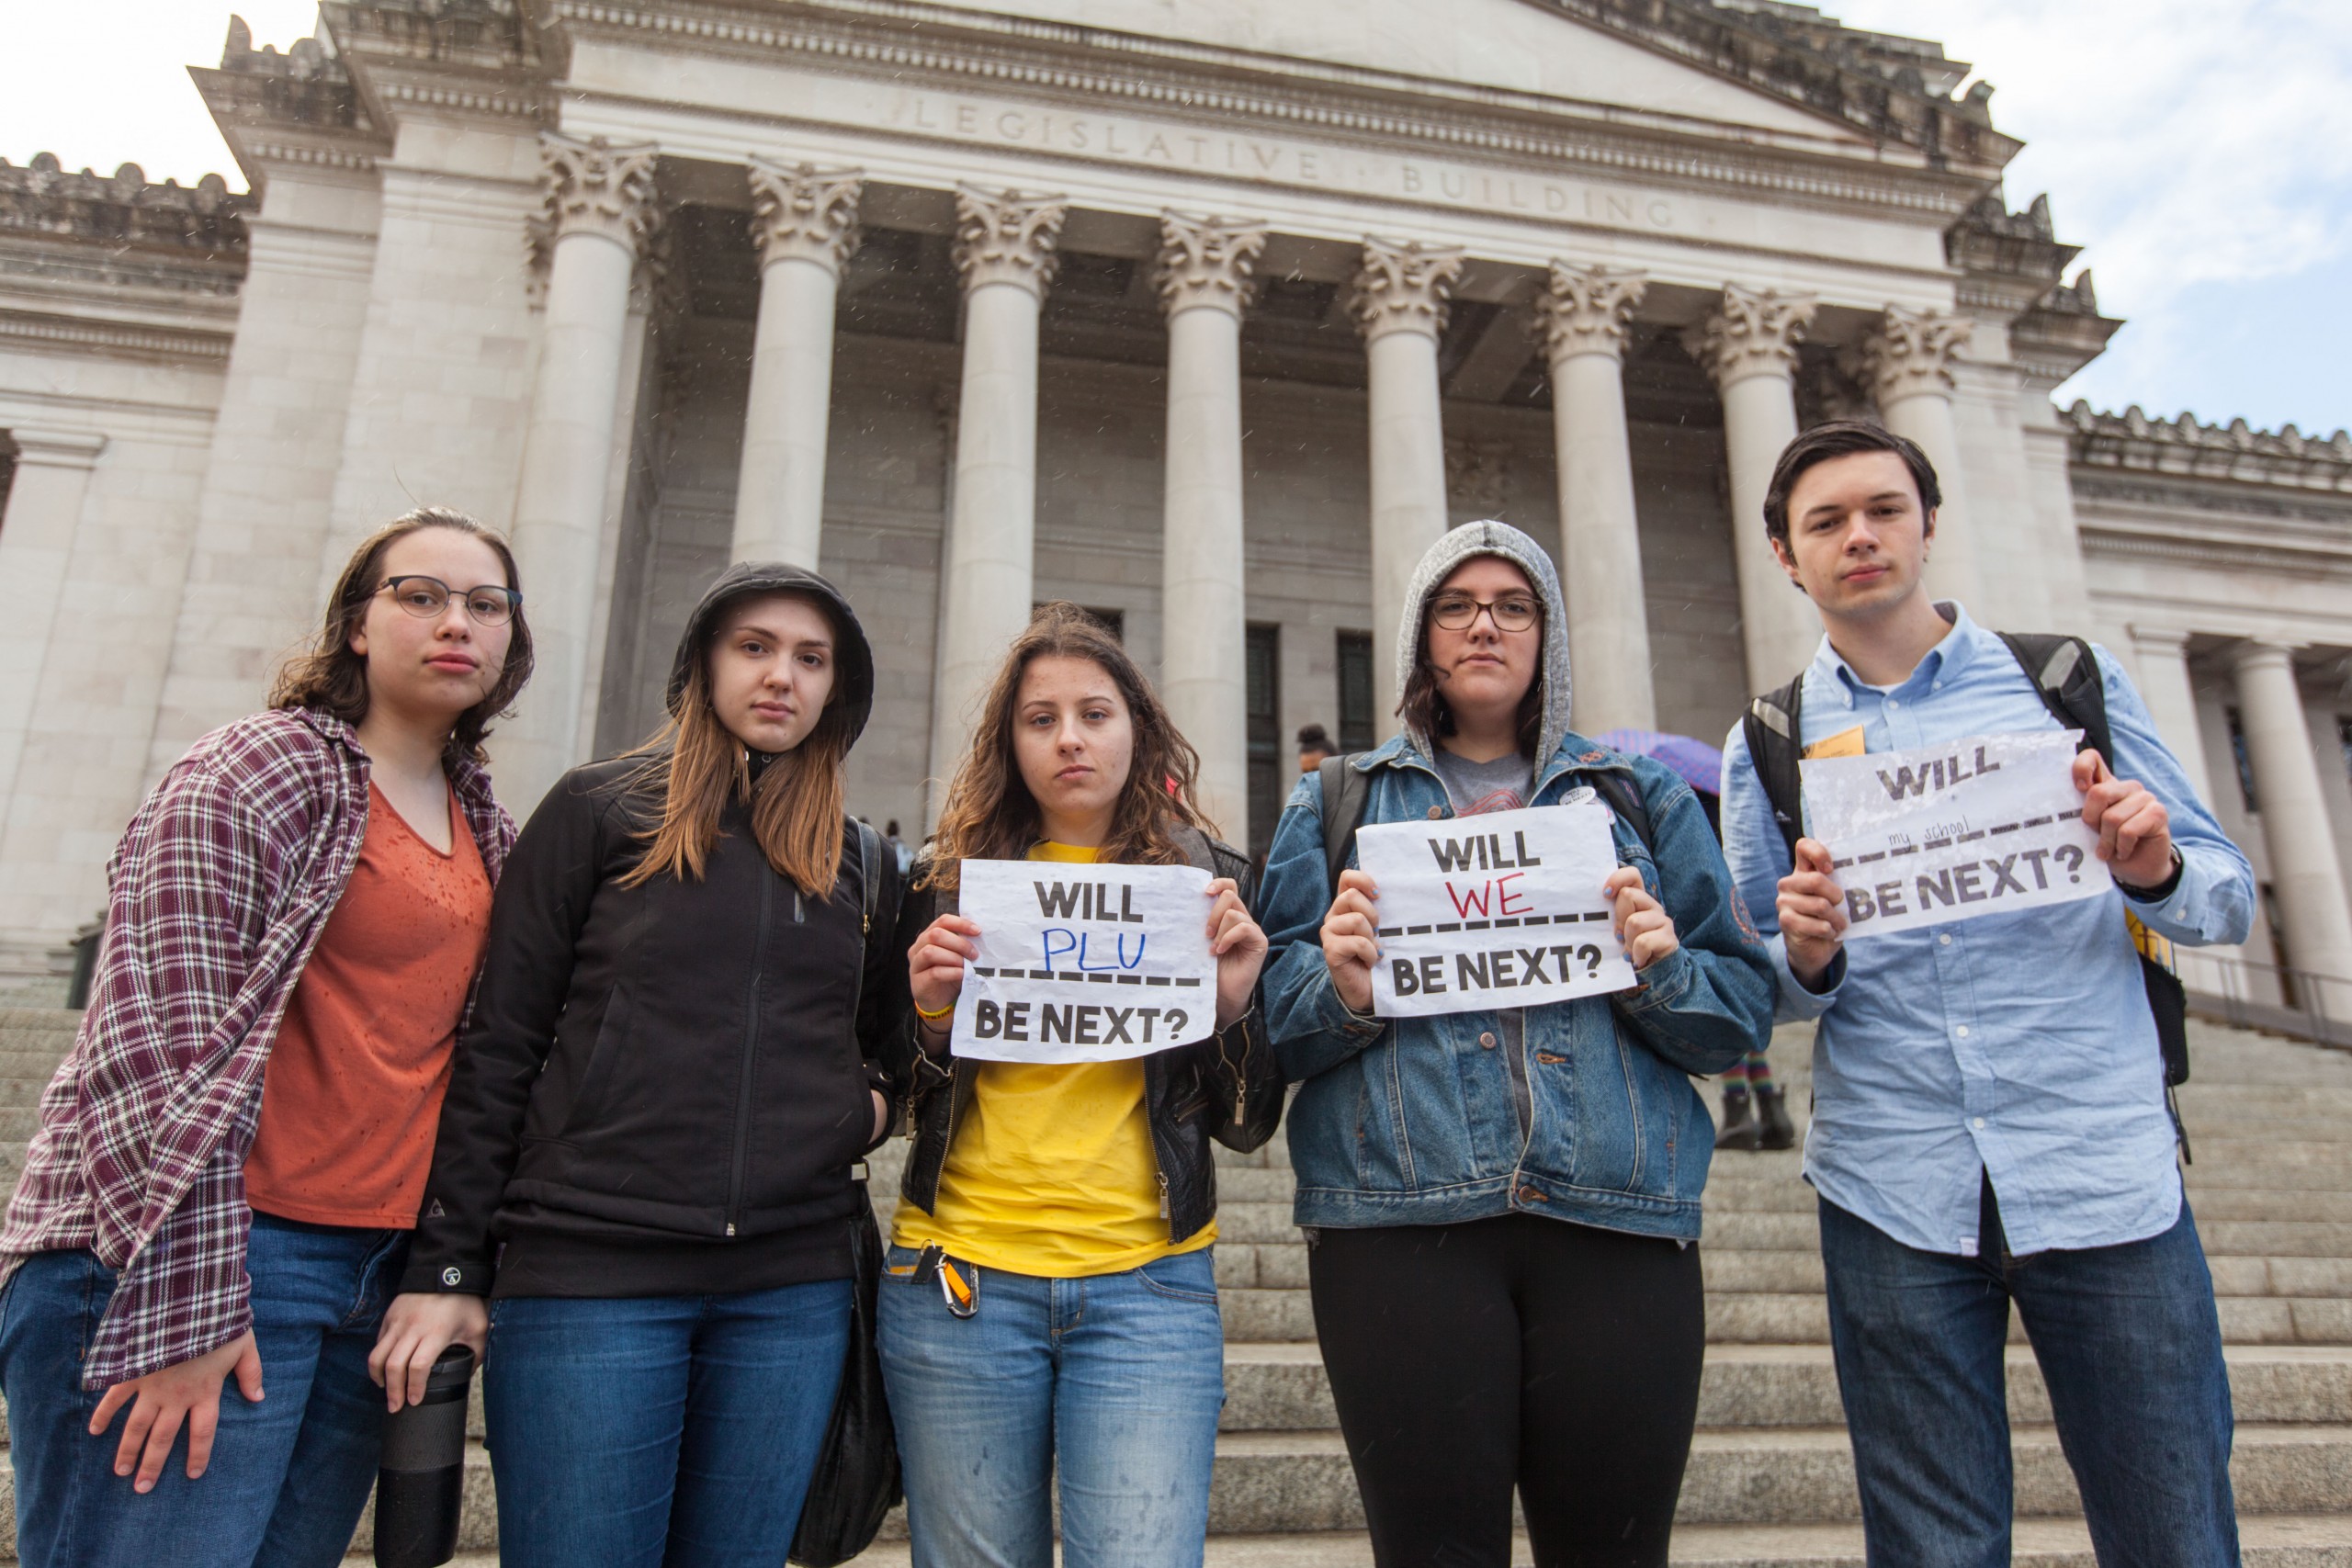 #willwebenext rally organized by PLU's Gracie Anderson to take on gun violence in schools, Wednesday, March 14, 2018 held on the steps of the state capitol in Olympia Wash. (Photo: John Froschauer/PLU)